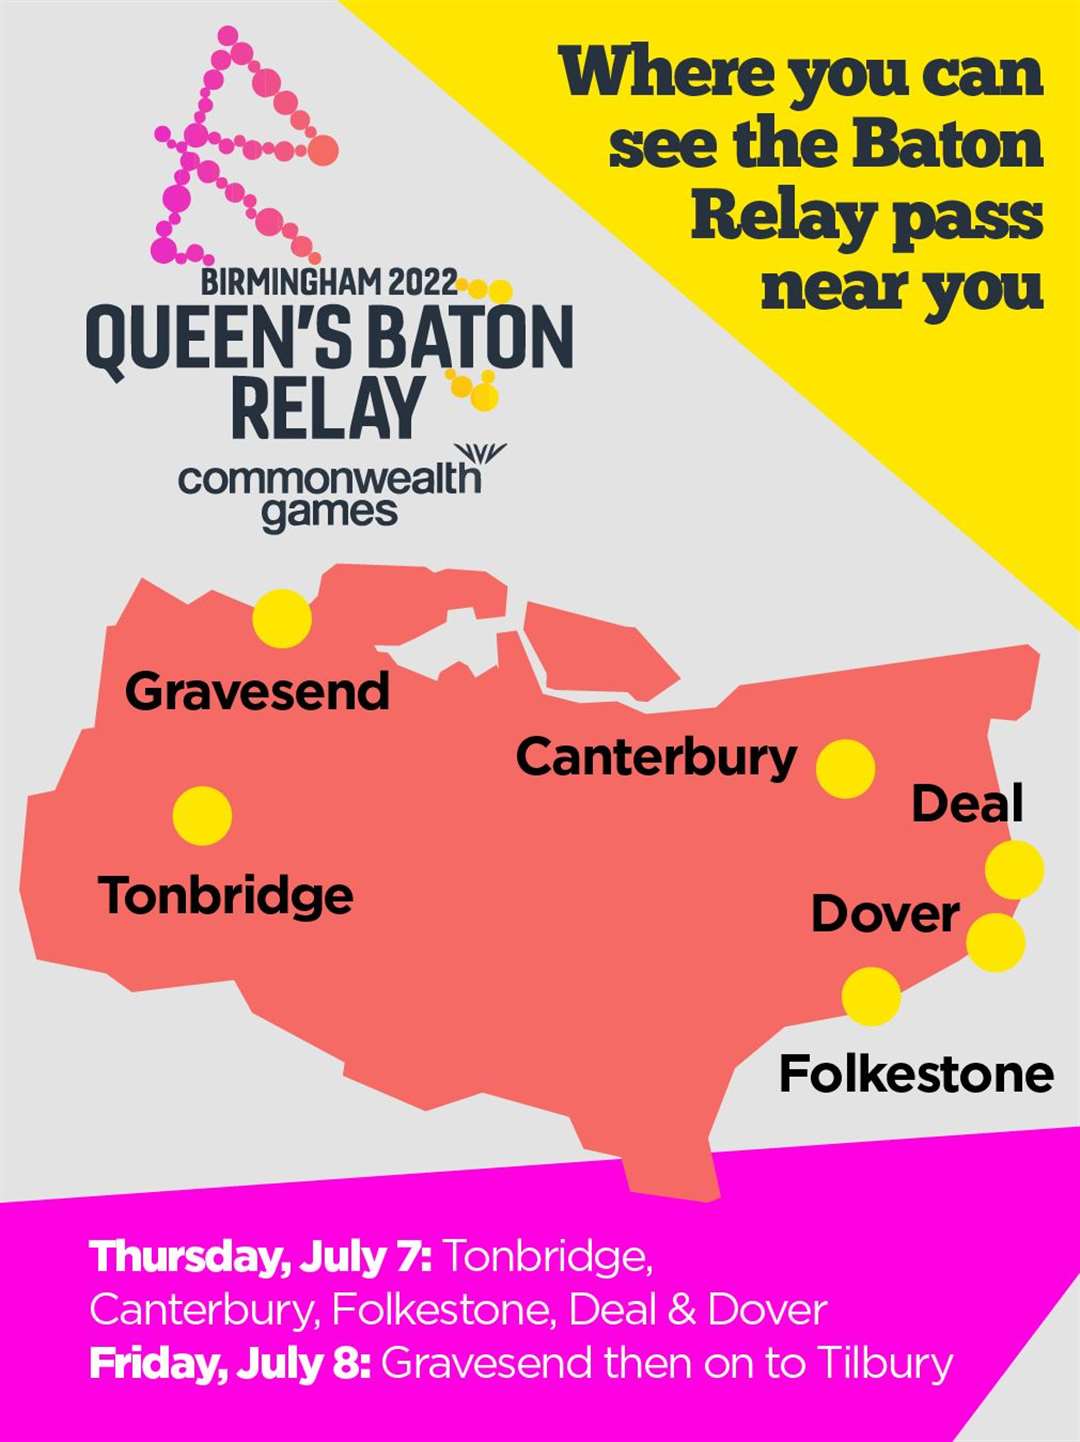 Six places in Kent have been chosen to form the relay route through the county